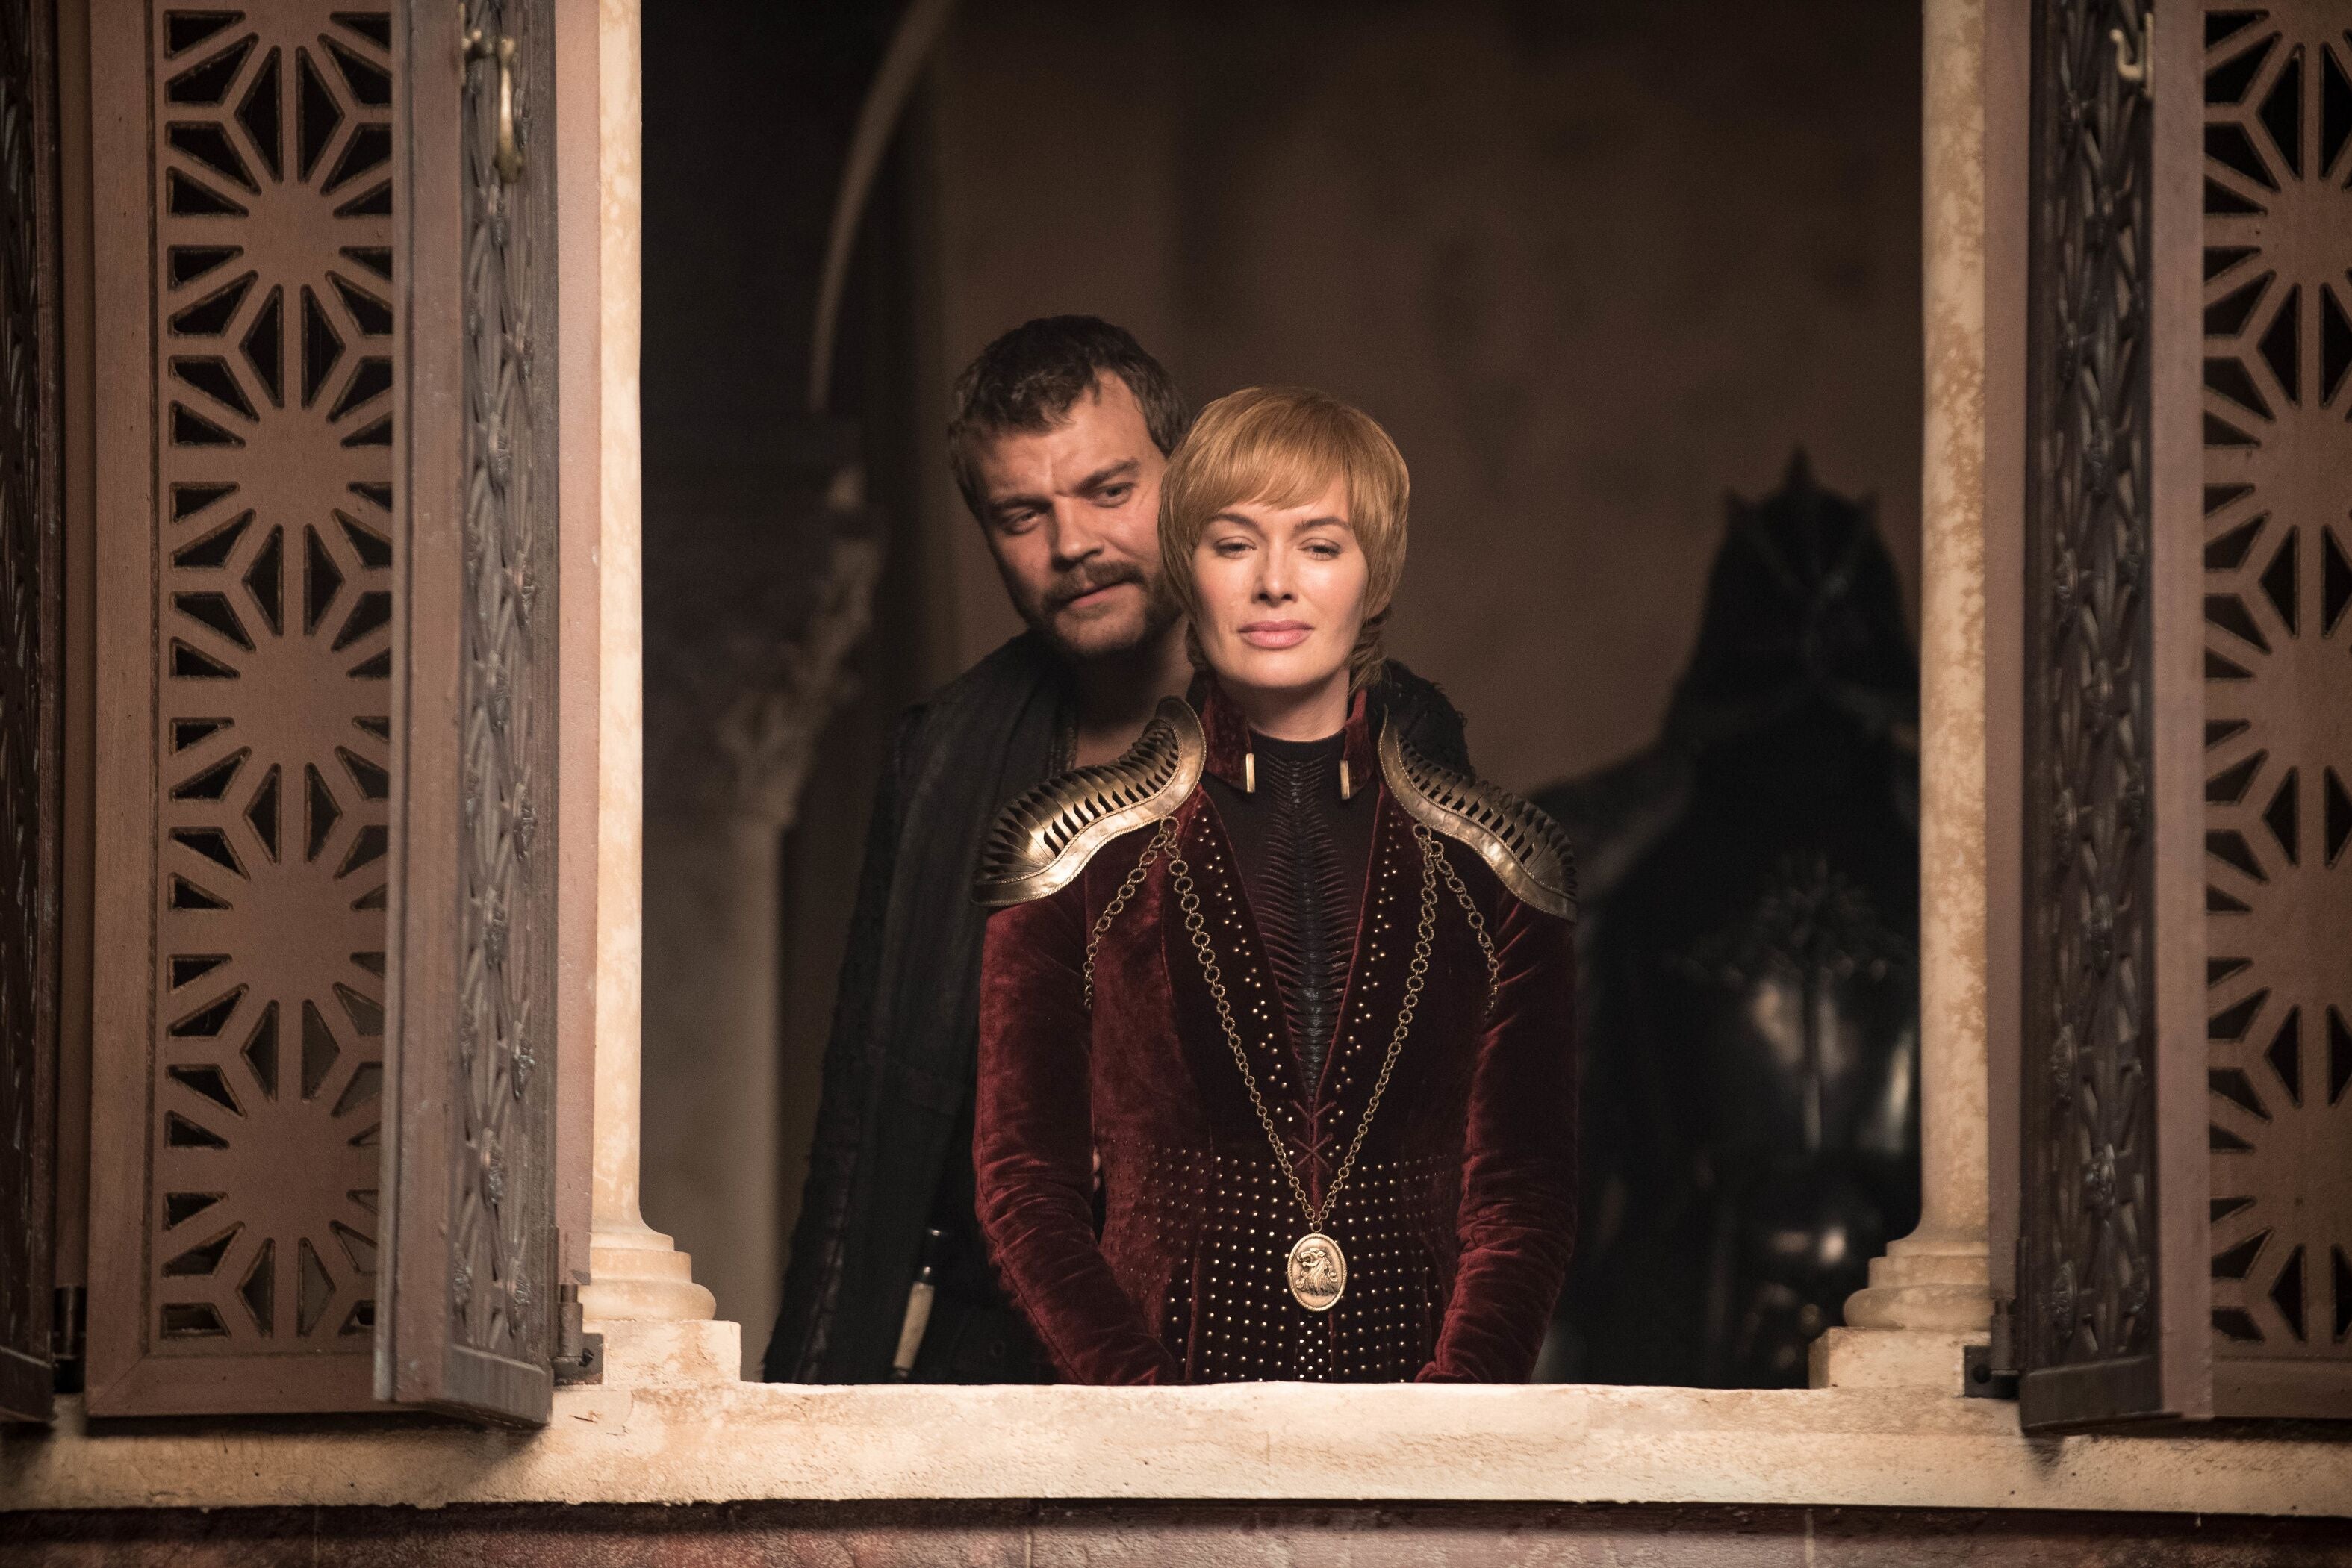 Cersei Lannister stands at a window, flanked by Euron Greyjoy and the Mountain.